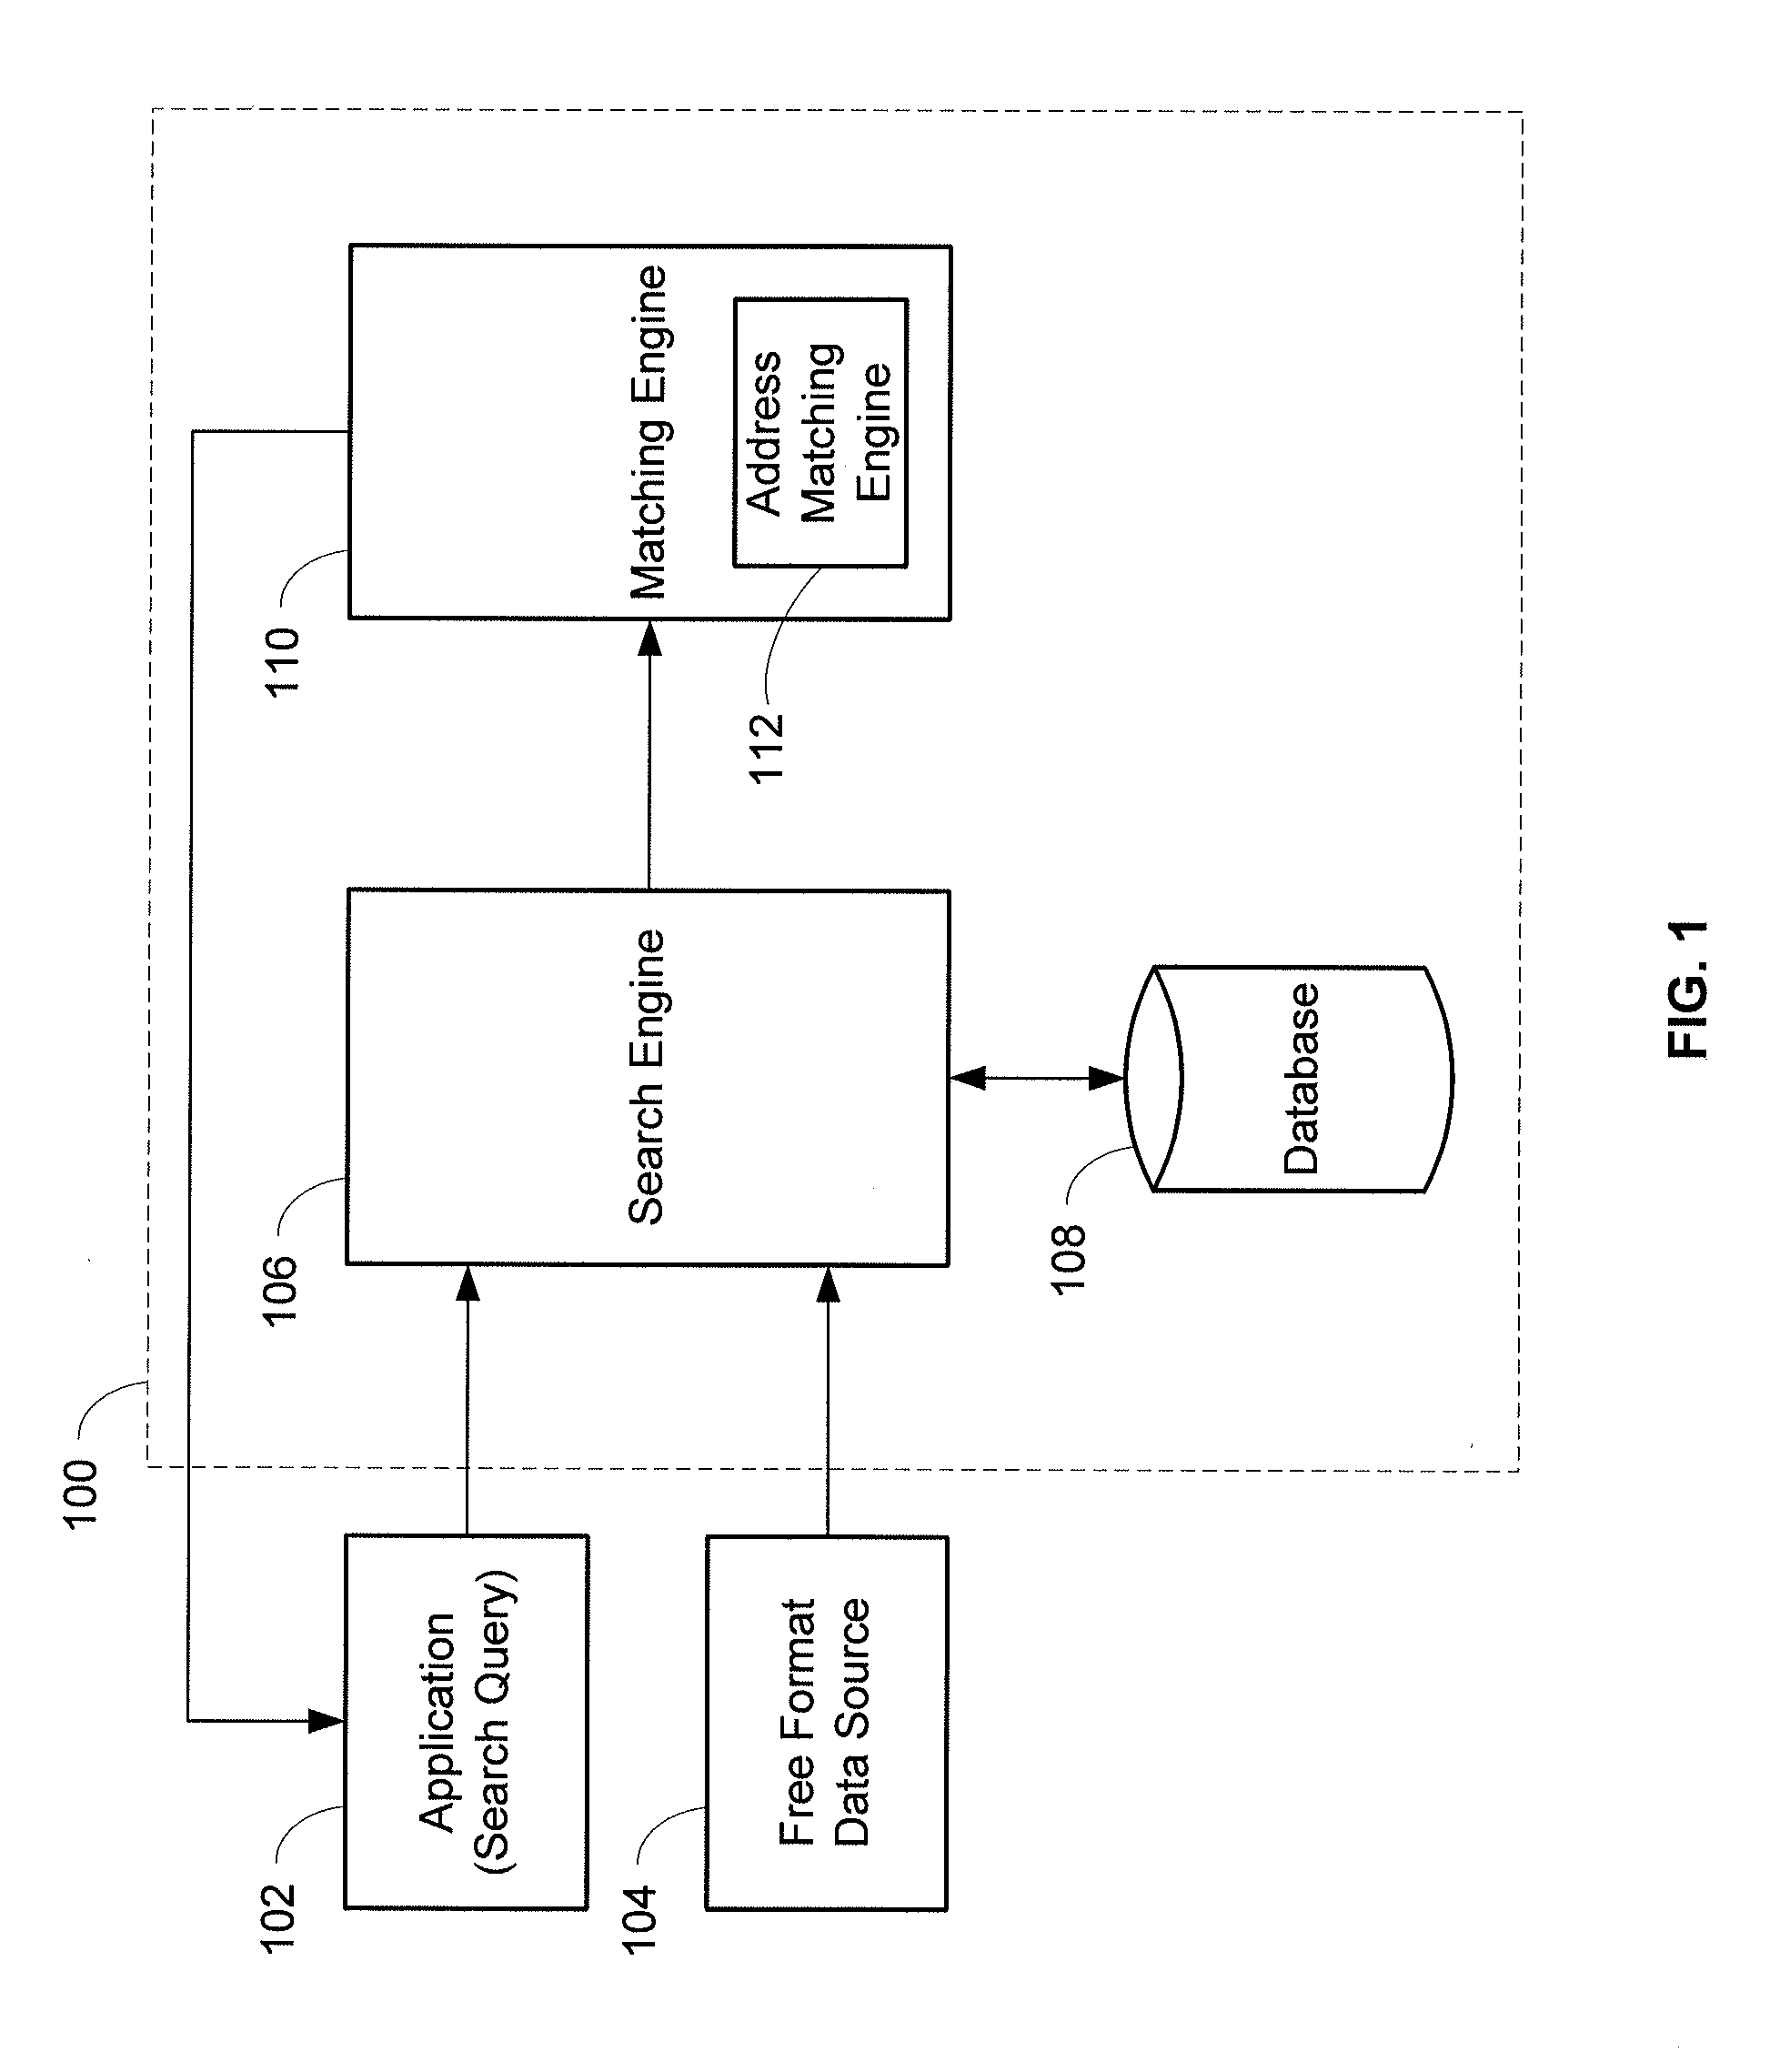 System and method for contextual and free format matching of addresses